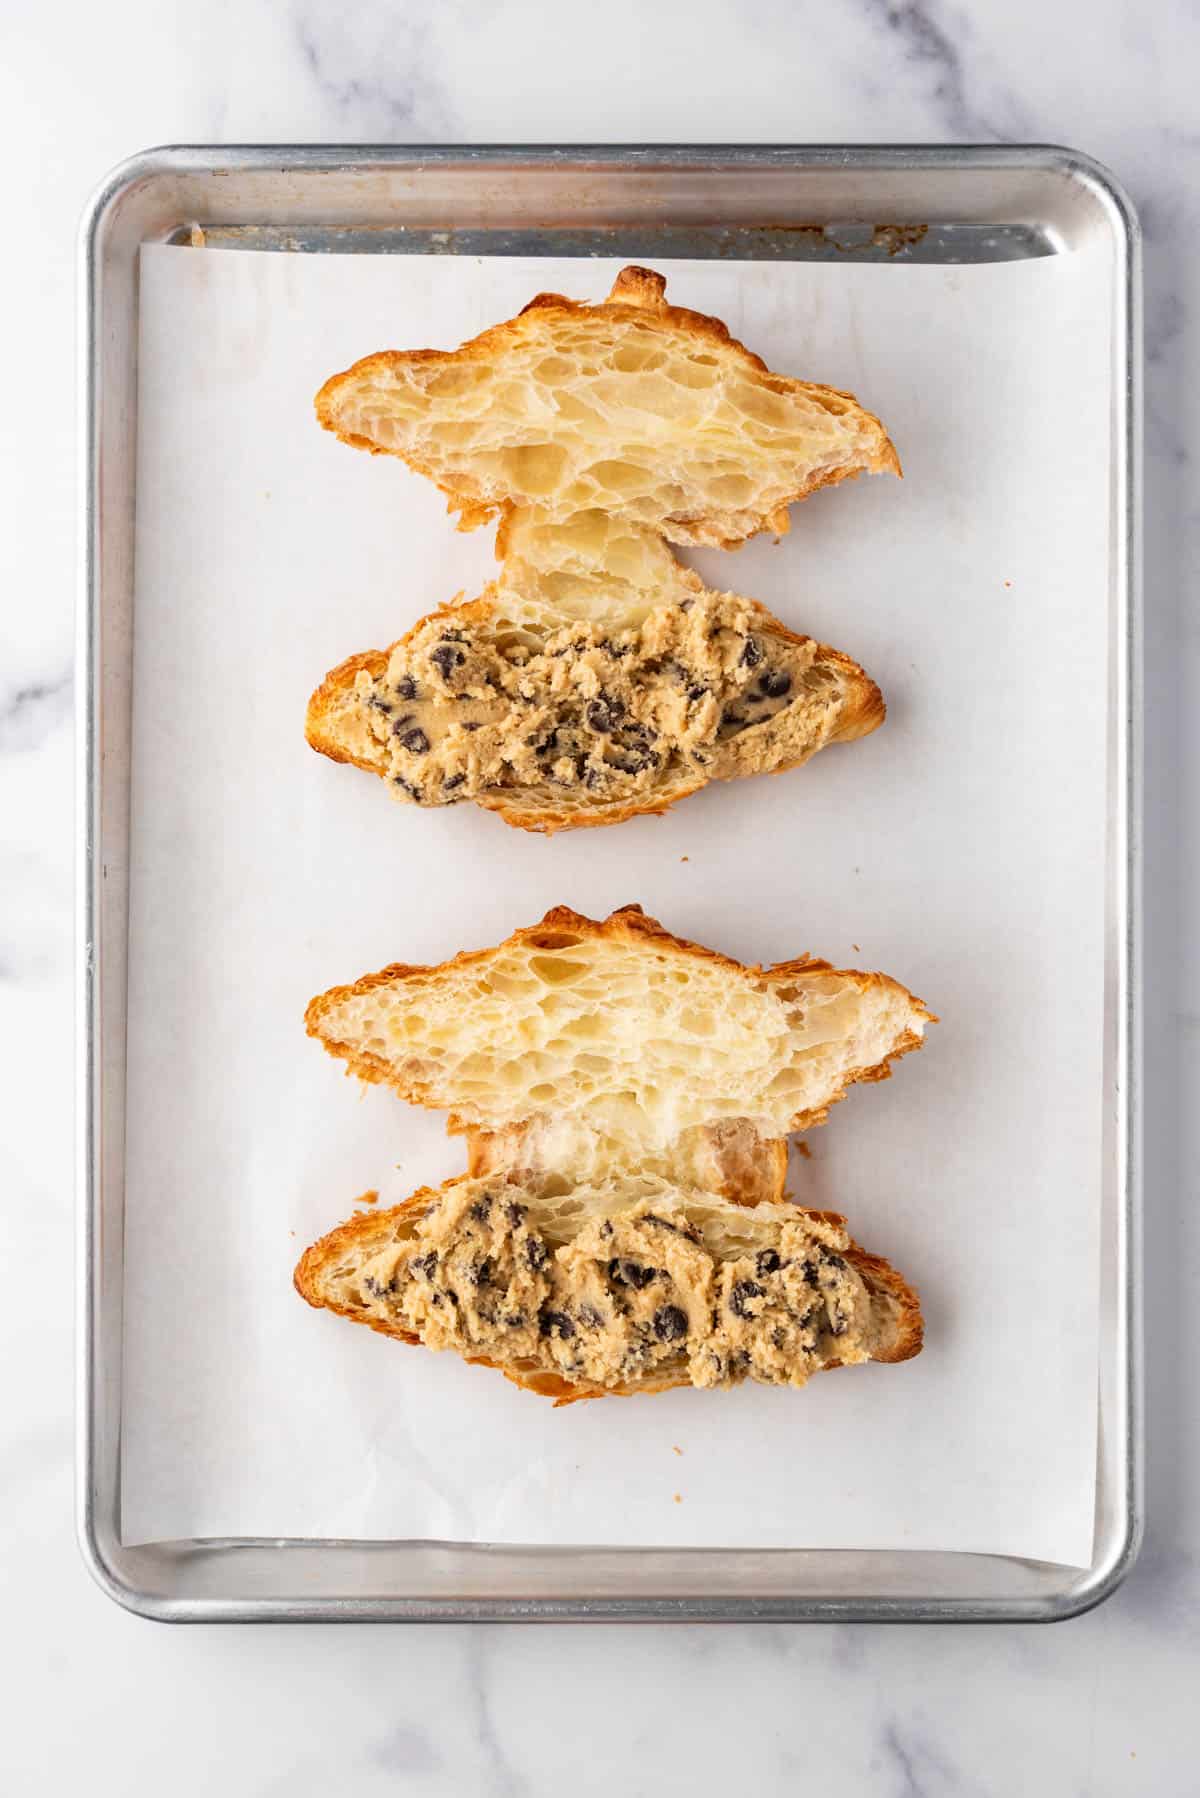 Croissants that have been sliced in half horizontally with chocolate chip cookie dough spread on the inside.